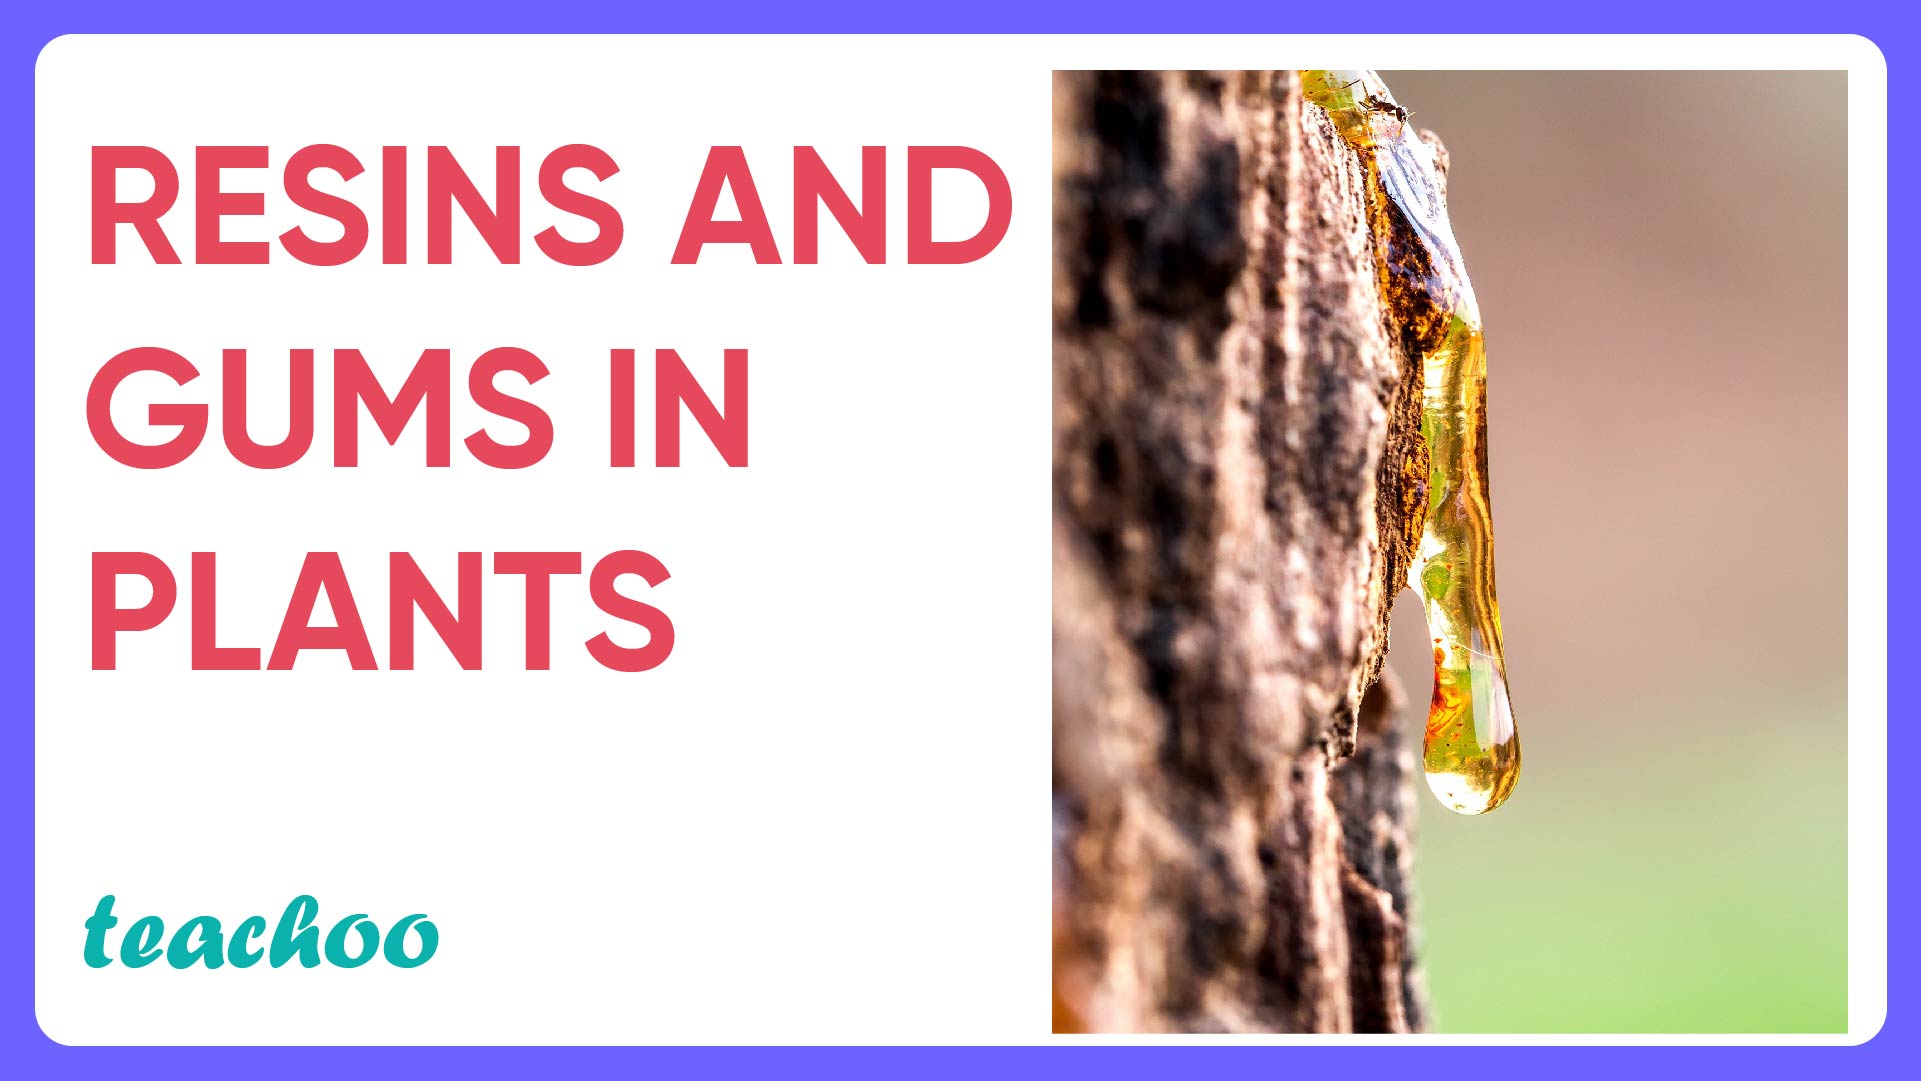 Resins and Gums in plants-01.jpg